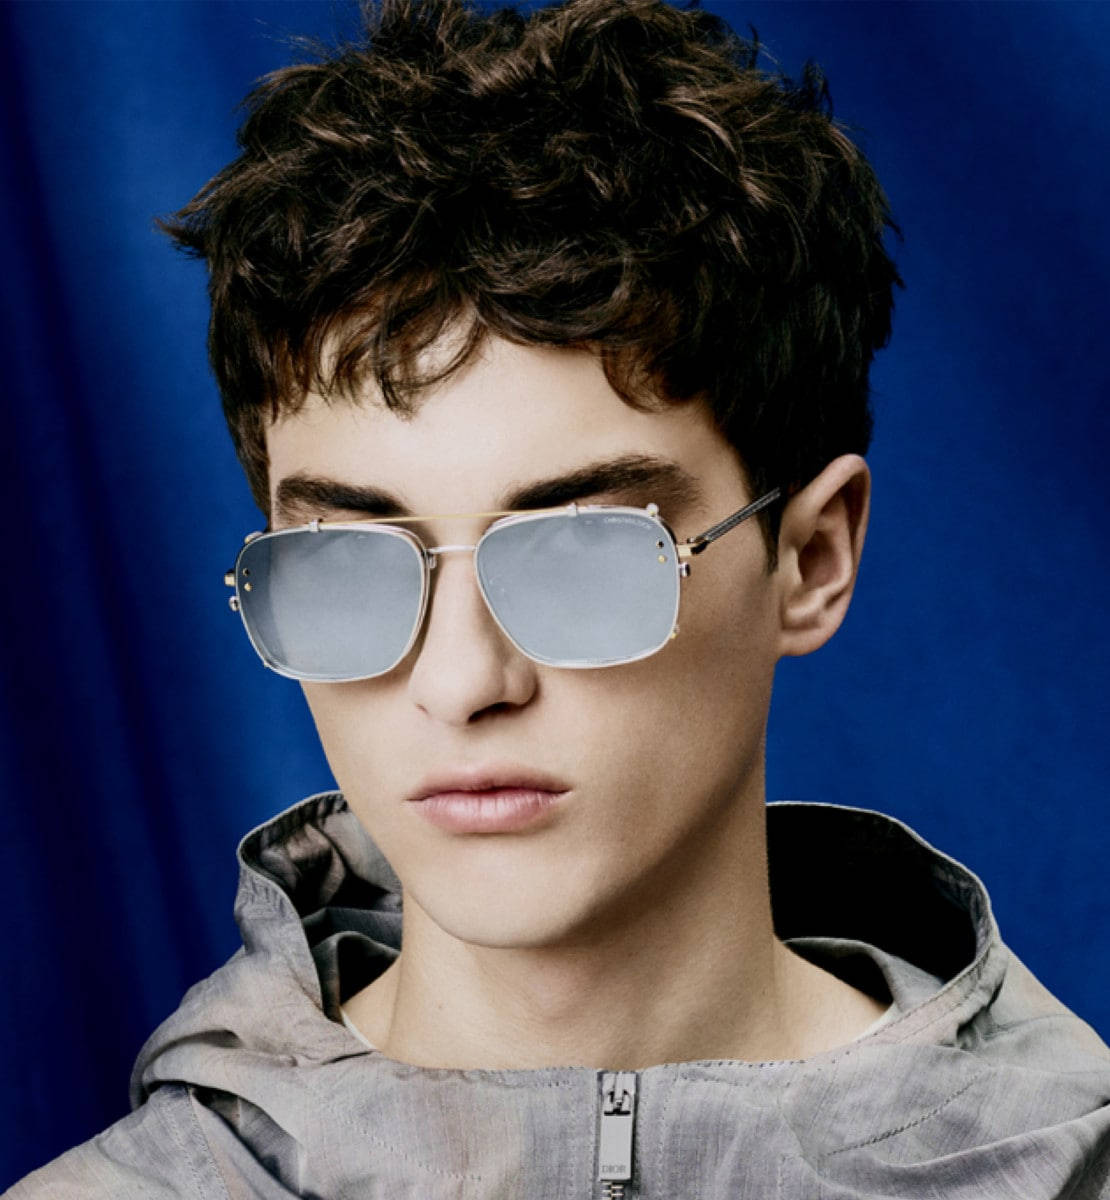 Exquisite Silver Sunglasses By Christian Dior Wallpaper